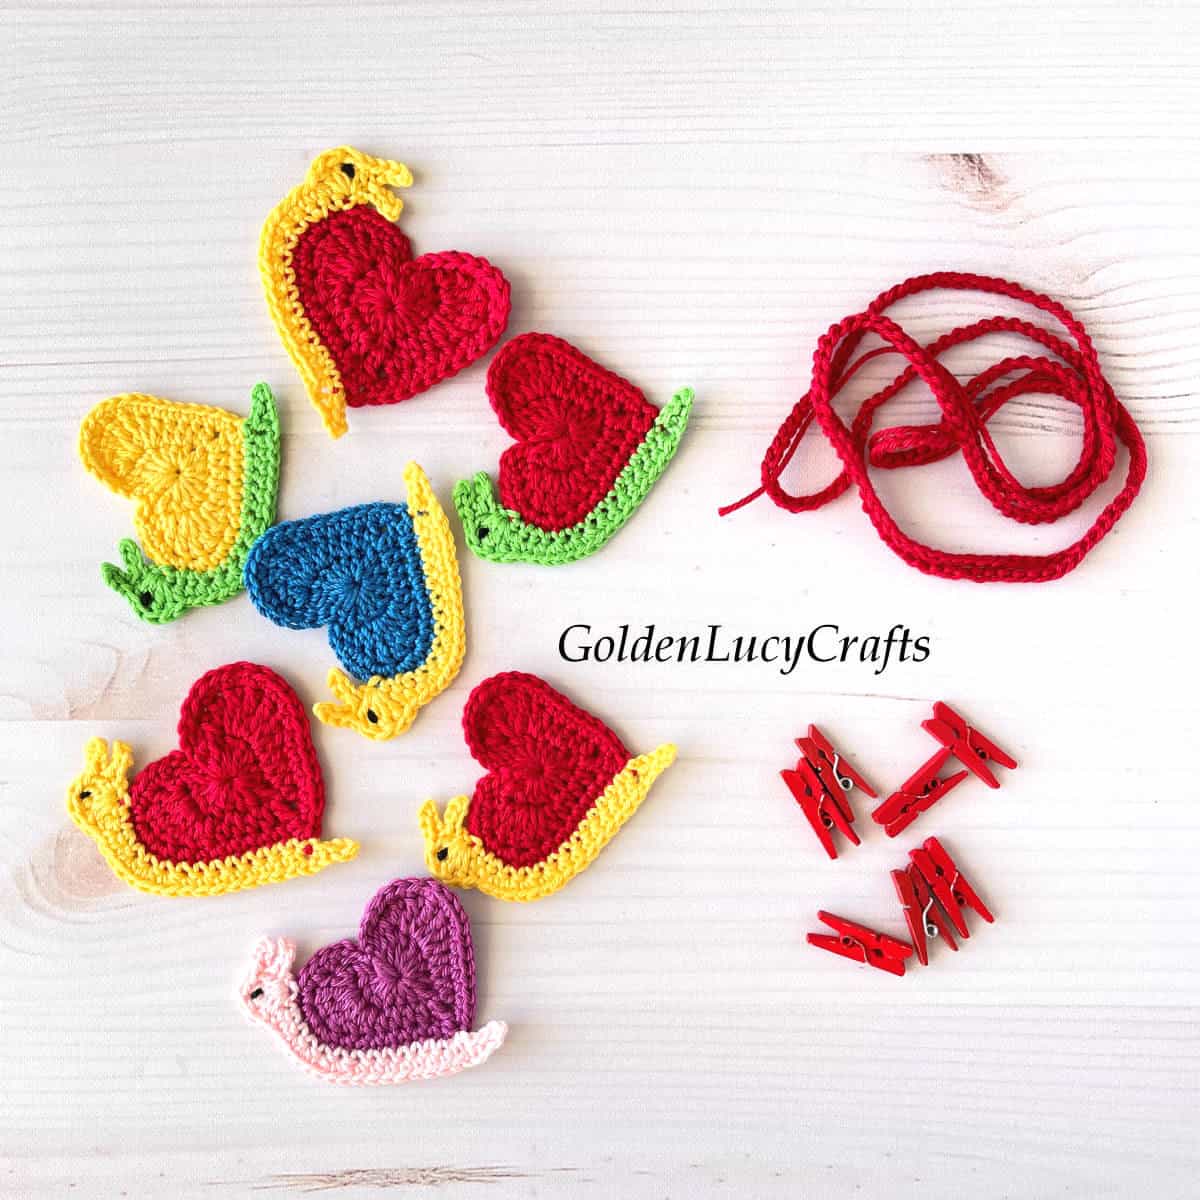 Crocheted snail appliques, red small clothespins, red string.